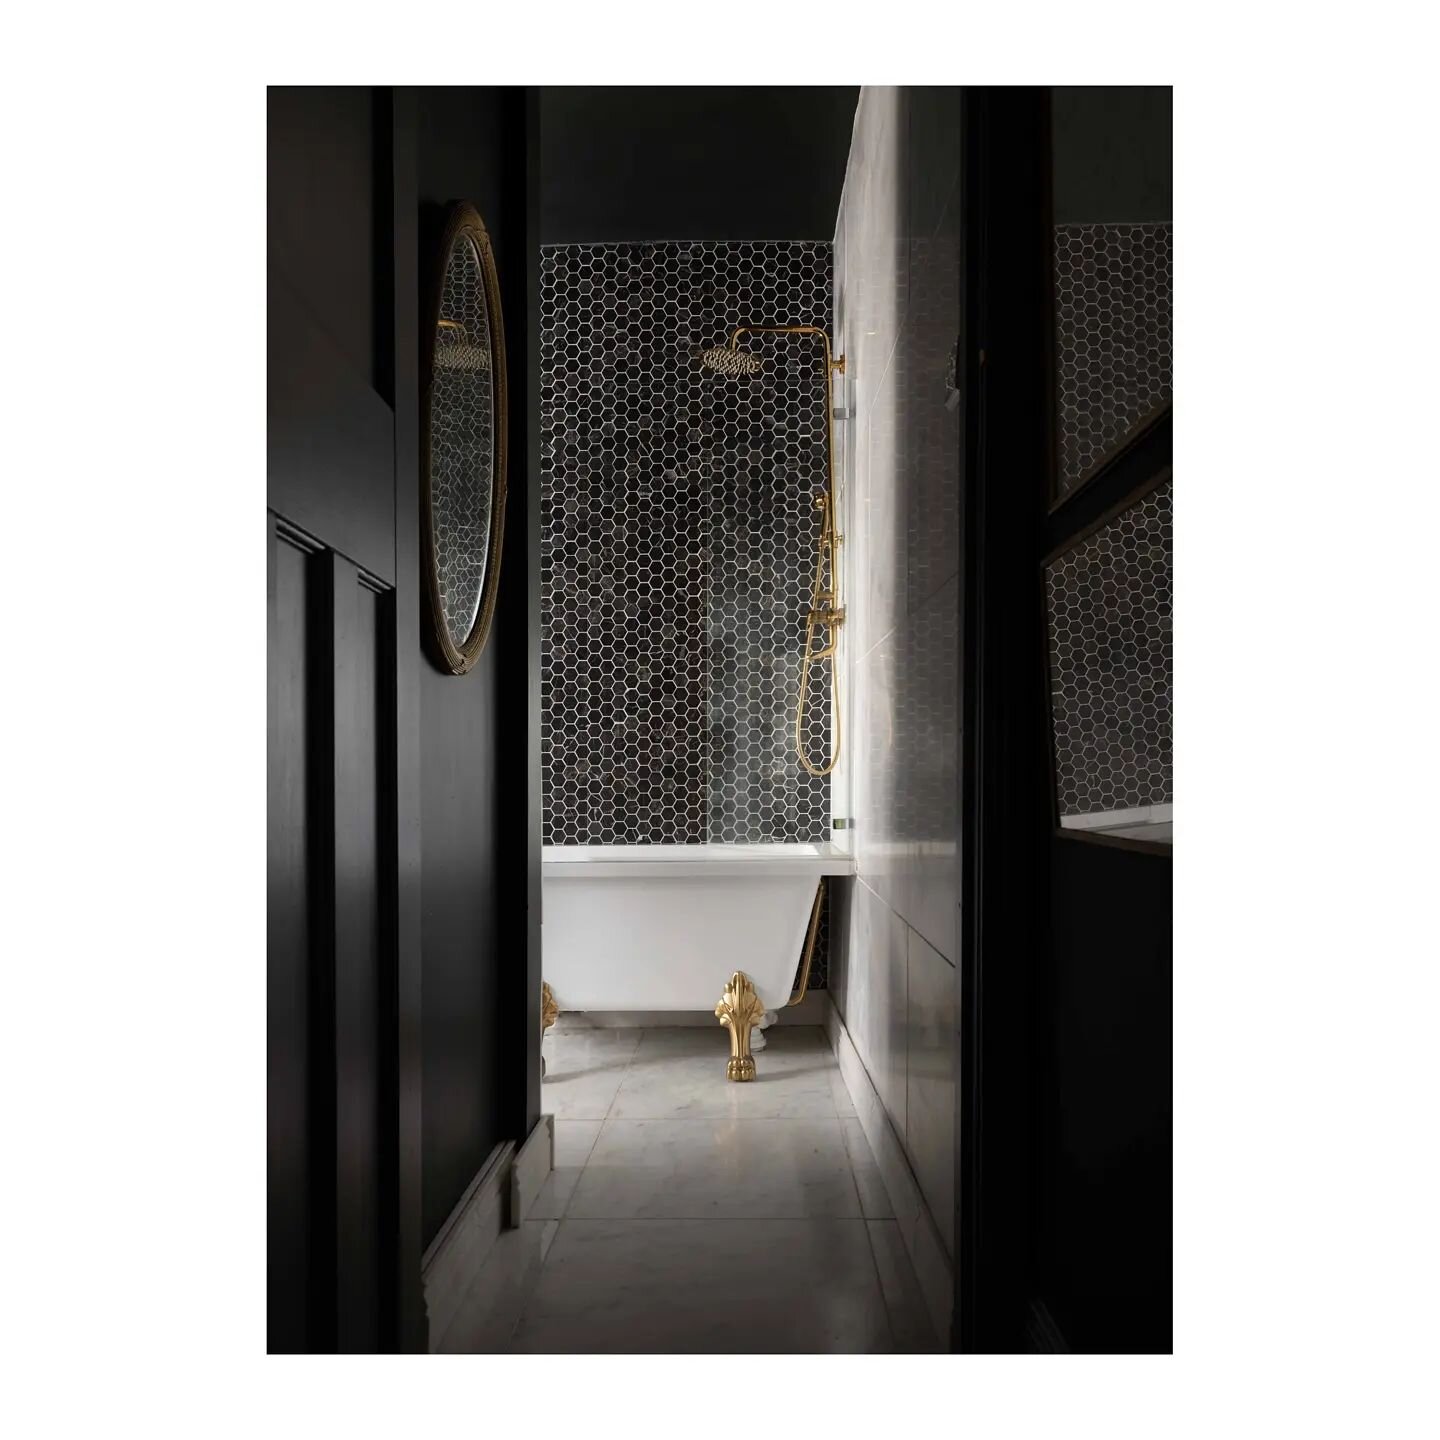 【A Little Splash - Brighton &amp; Hove】
A little space means you are ever closer to the details fitted. It often means you don't need as many tiles or an extra large tub allowing for more quality in the budget. With that in mind the designer really b